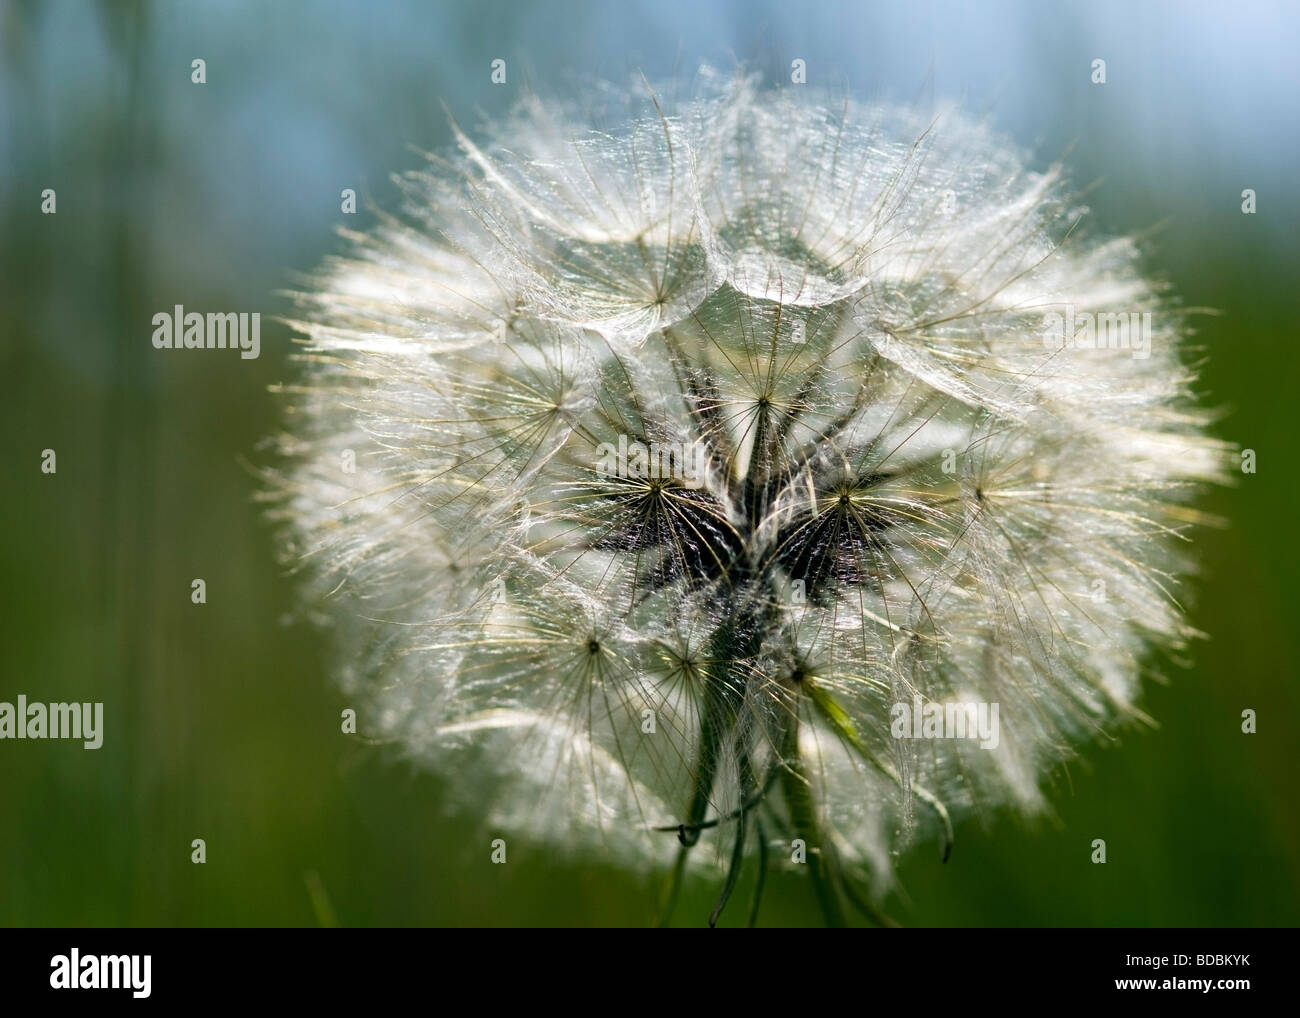 Intricate beauty of a common dandelion clock, Orford, Suffolk, England Stock Photo